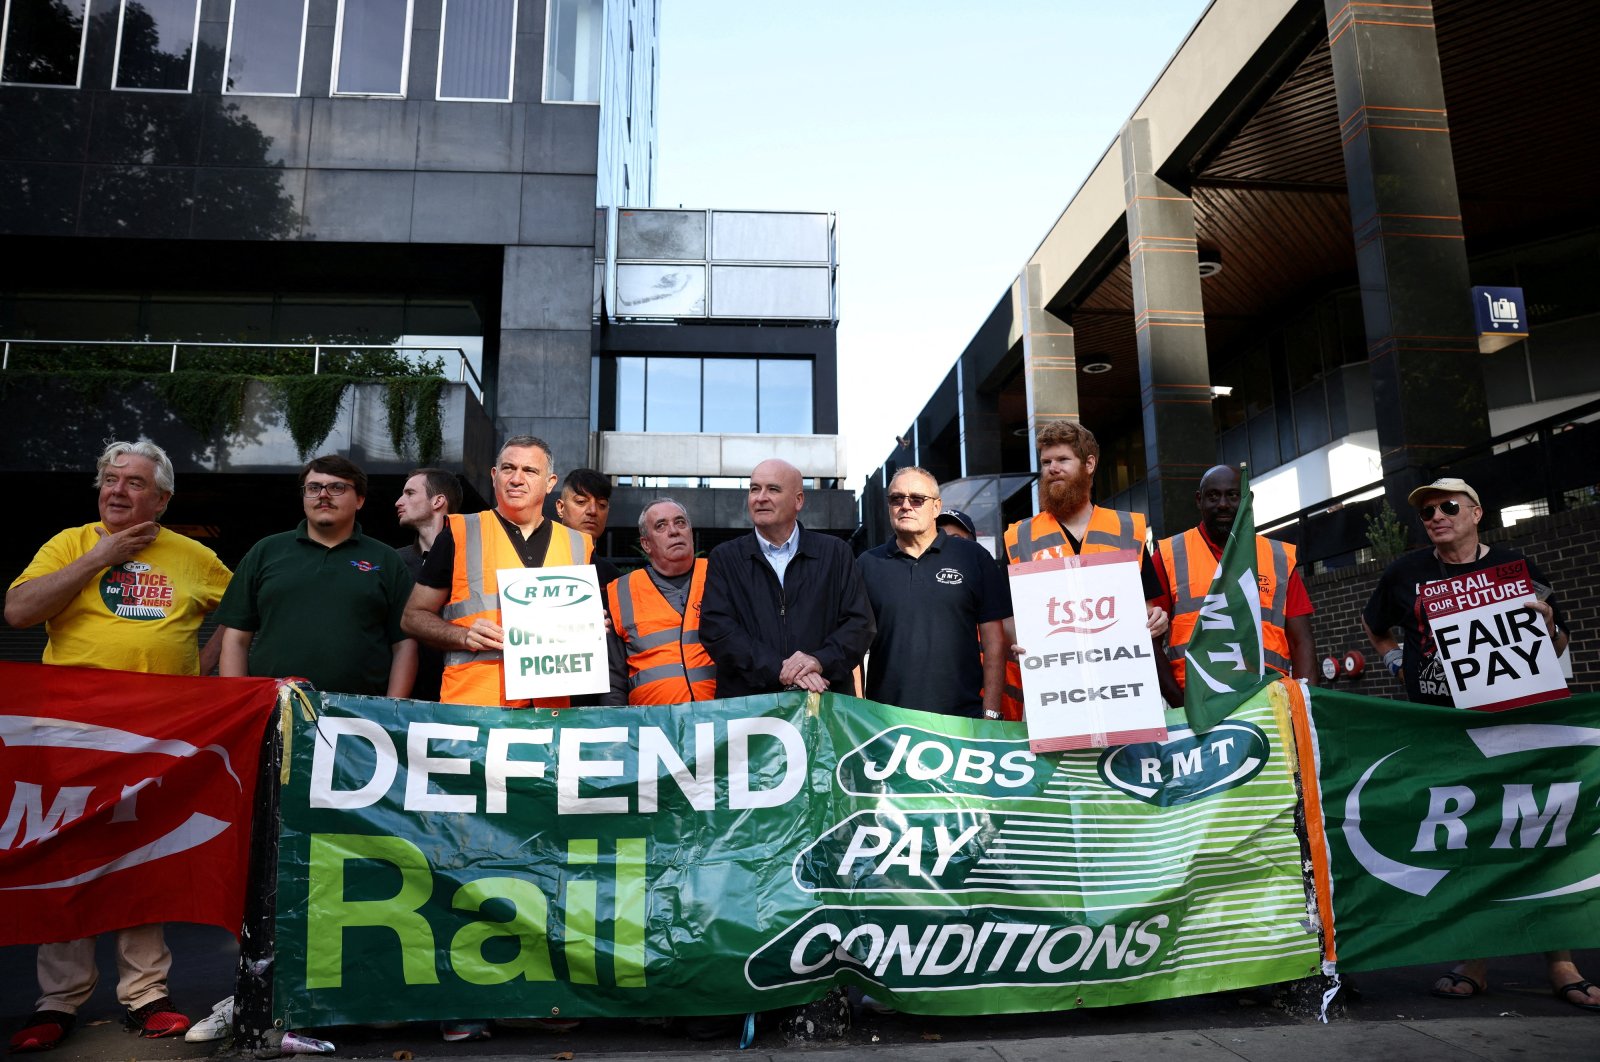 Mick Lynch, general secretary of the National Union of Rail, Maritime and Transport Workers, joins other union members on strike at a picket line outside Euston railway station in London, Britain, Aug. 20, 2022. (Reuters Photo)